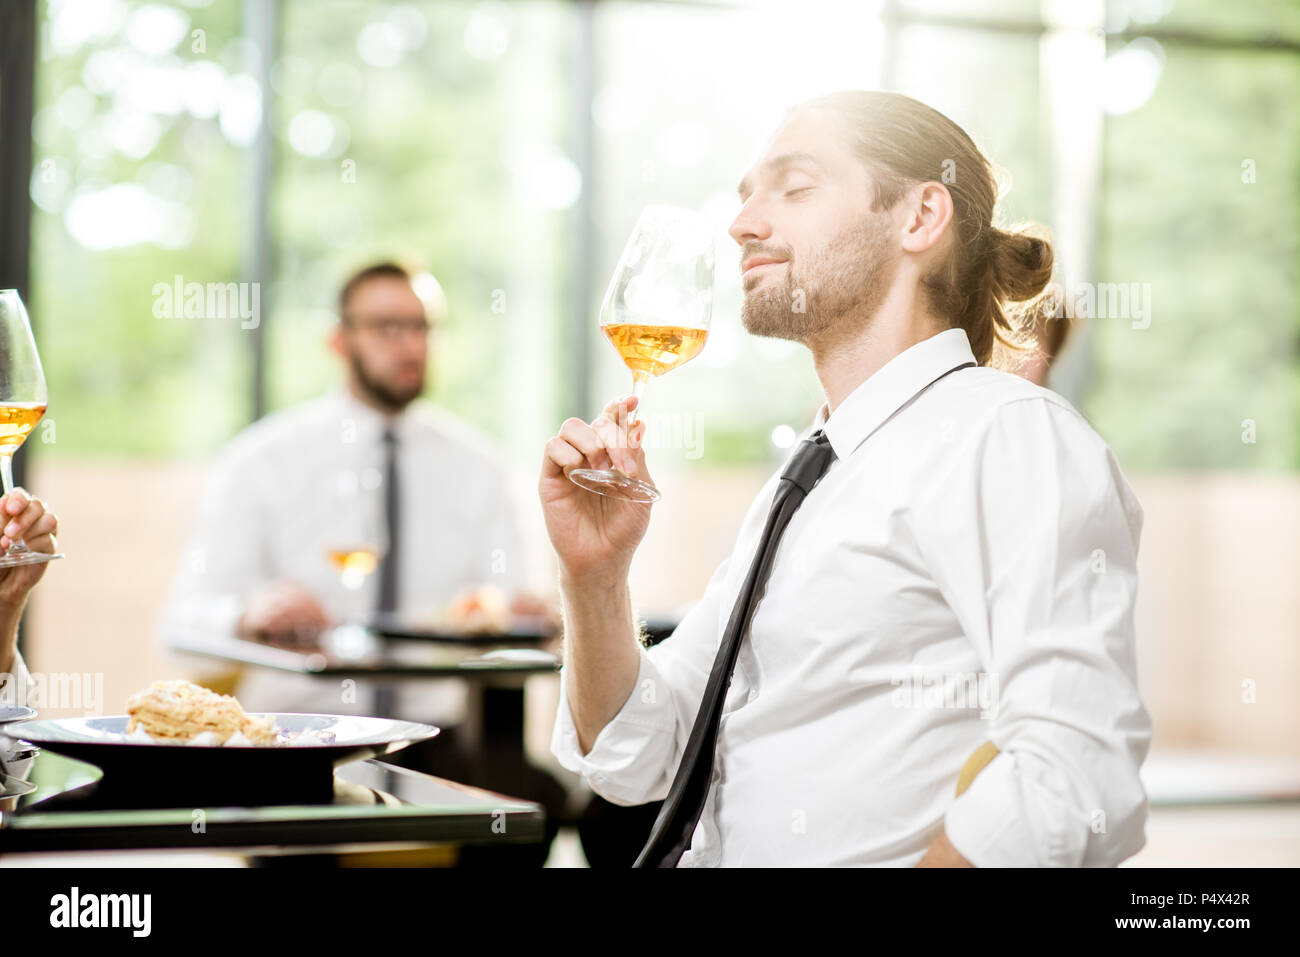 Business people during a lunch at the restaurant Stock Photo